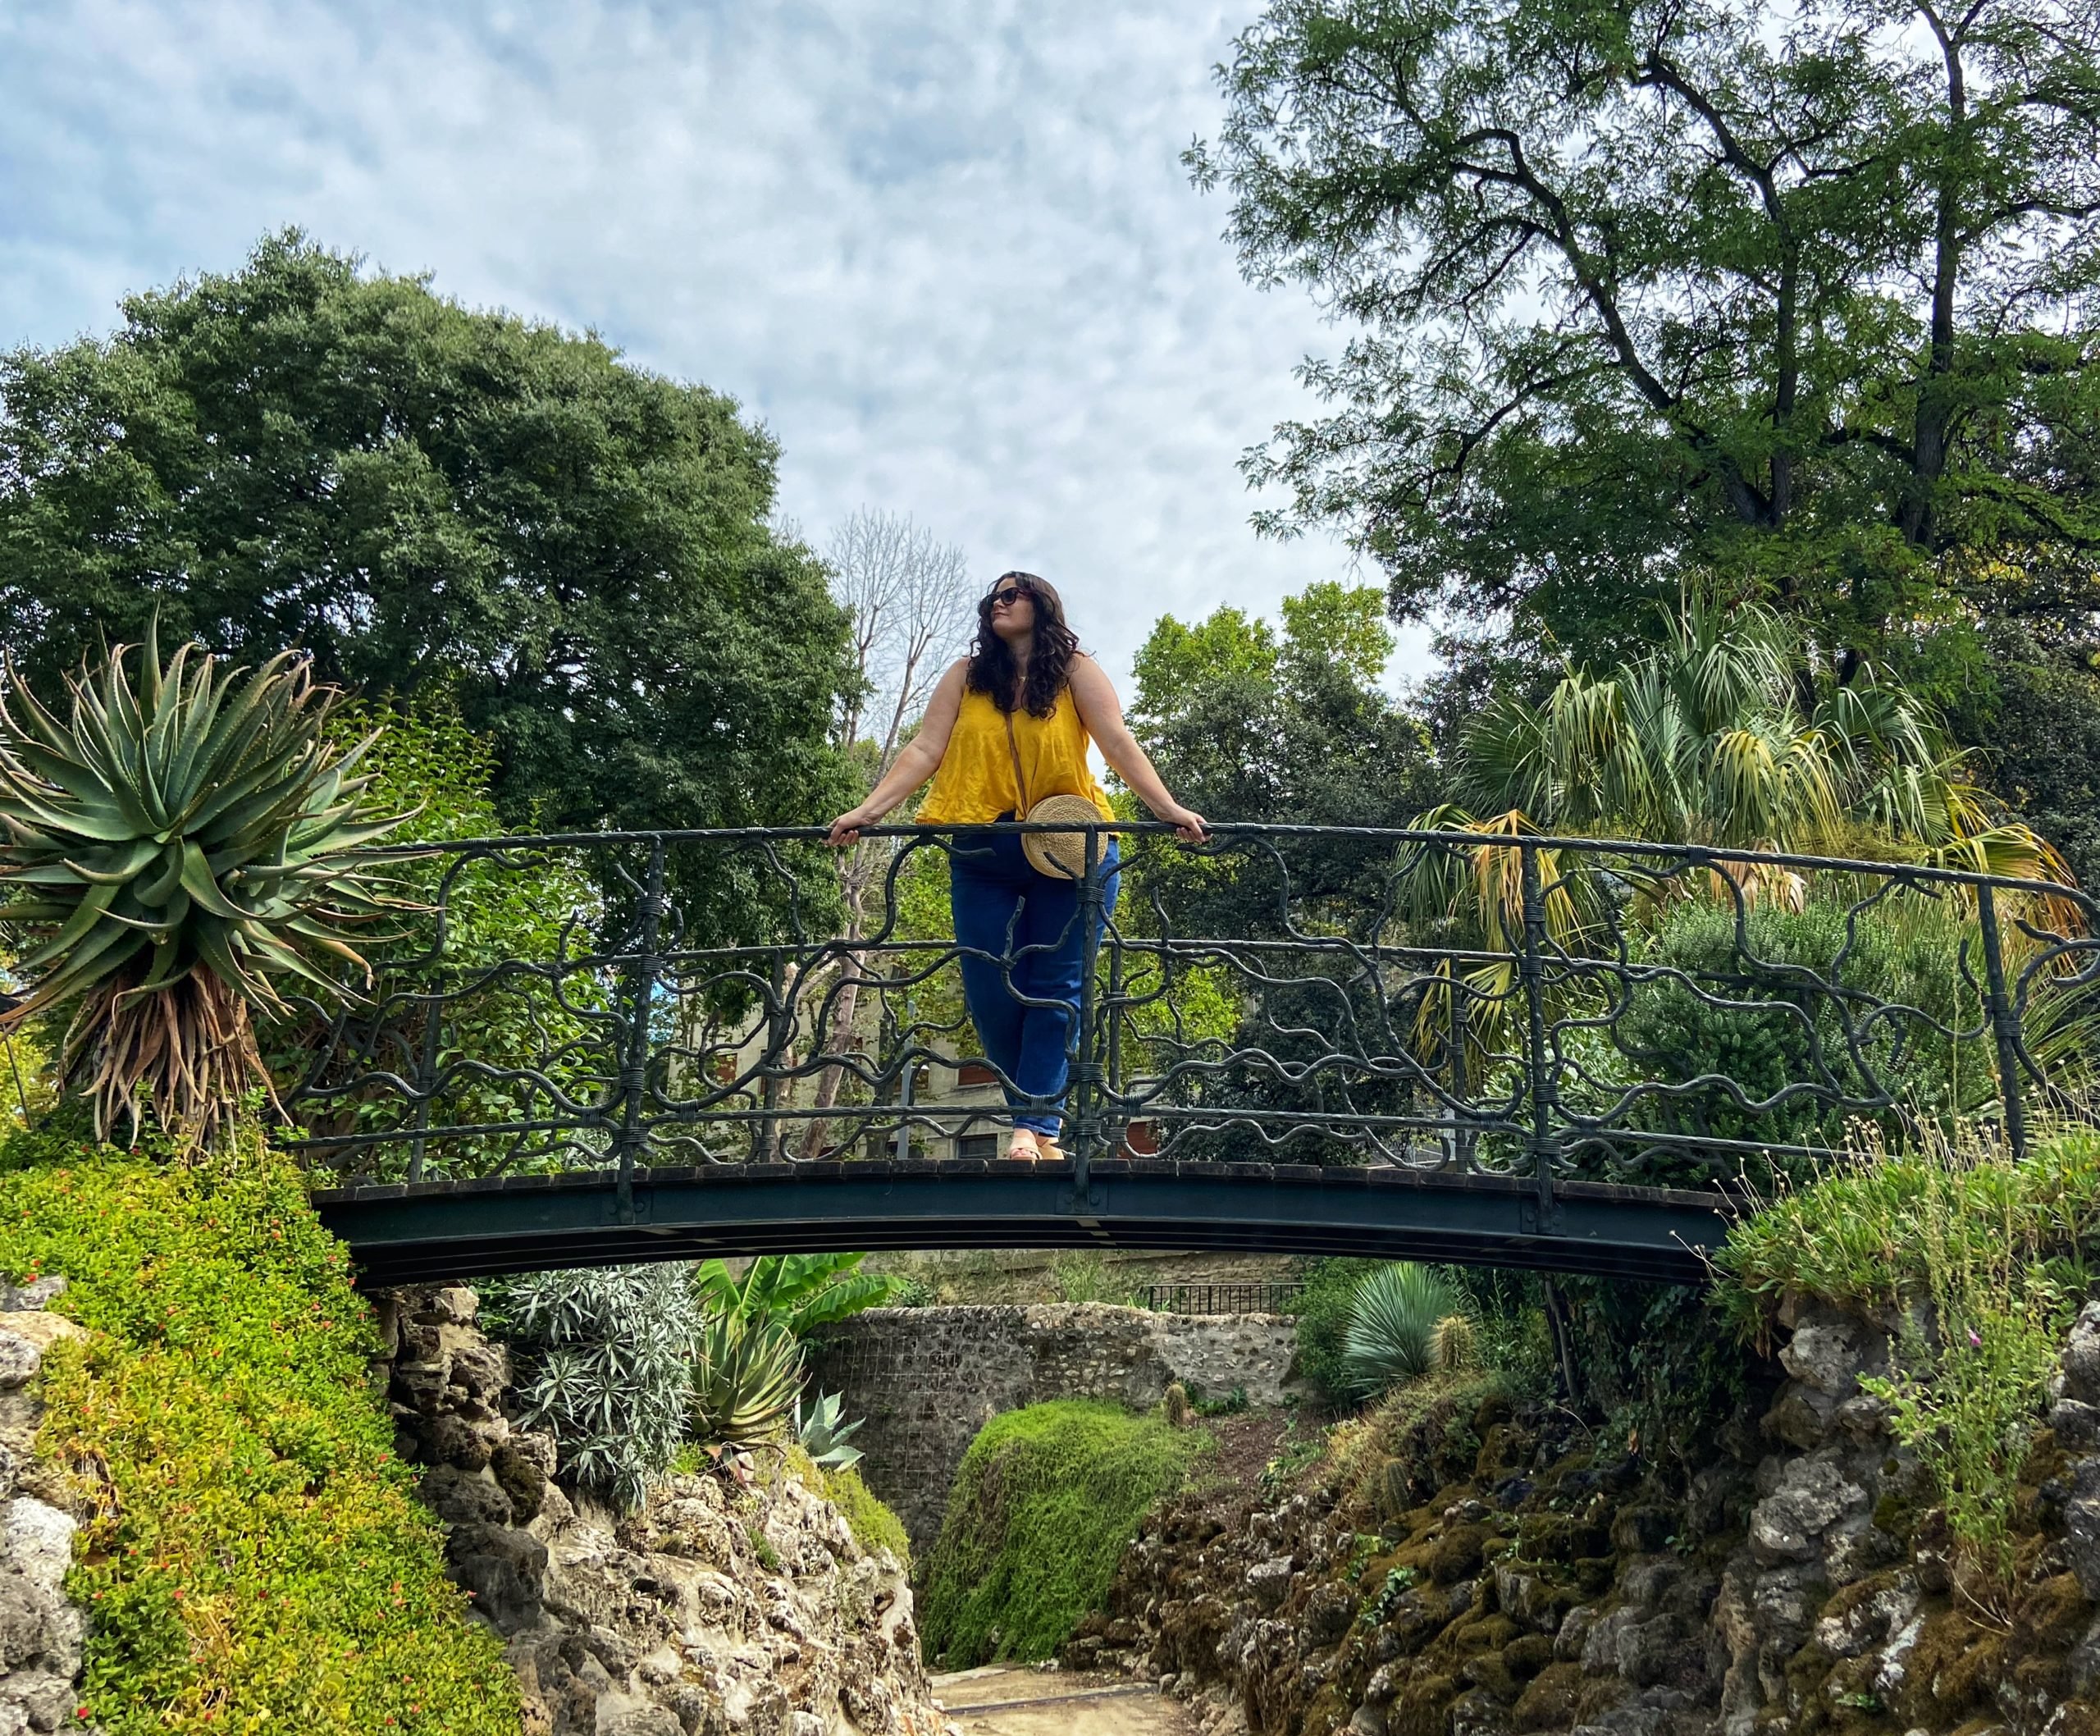 Mary Alice enjoys a day out in the Jardin des Plantes, one of her favourite spots in Montpellier.